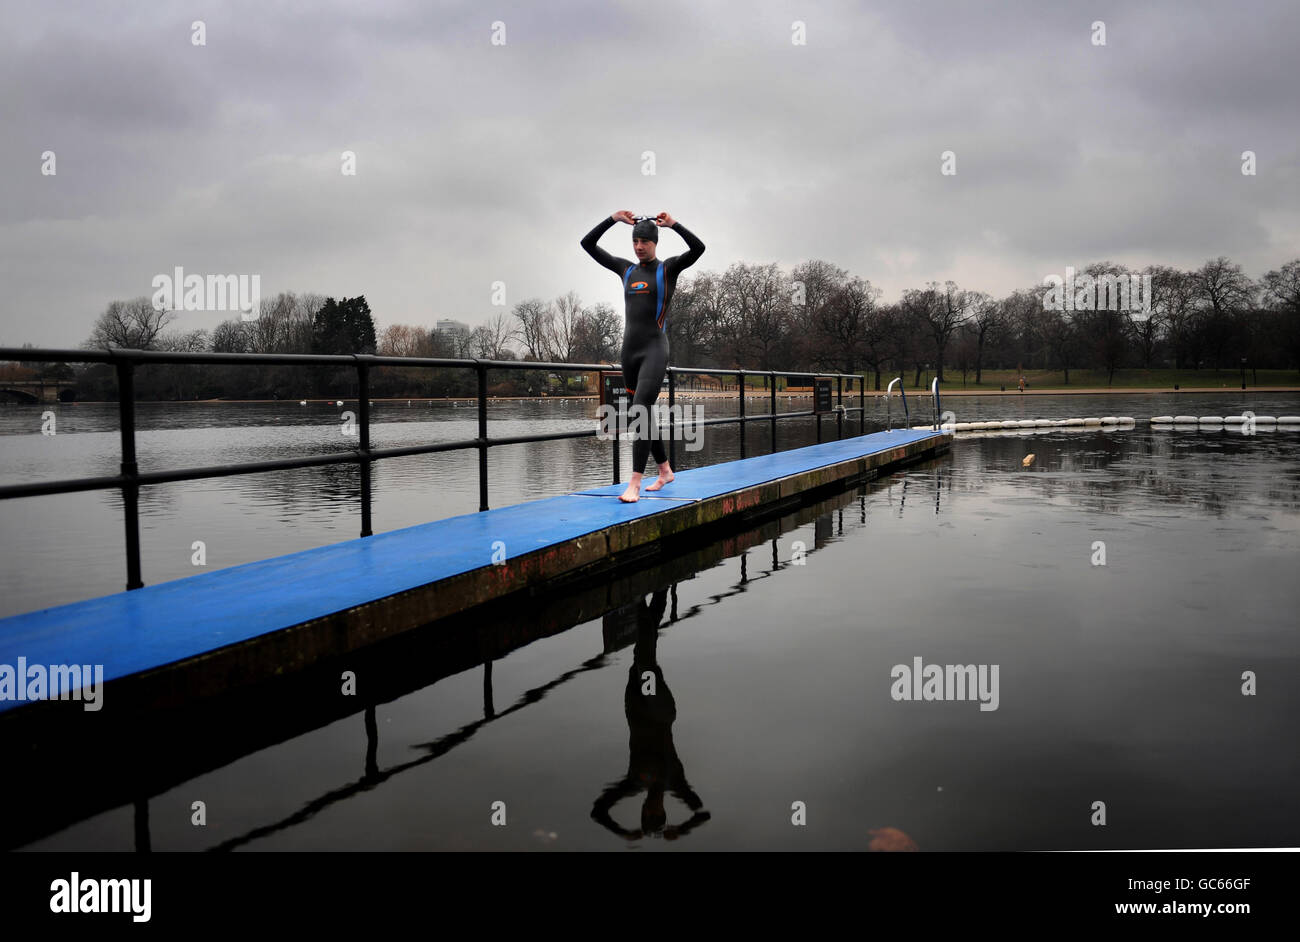 Triathlon world champion Great Britain's Alistair Brownlee during the photocall at Serpentine Lake, London. Stock Photo